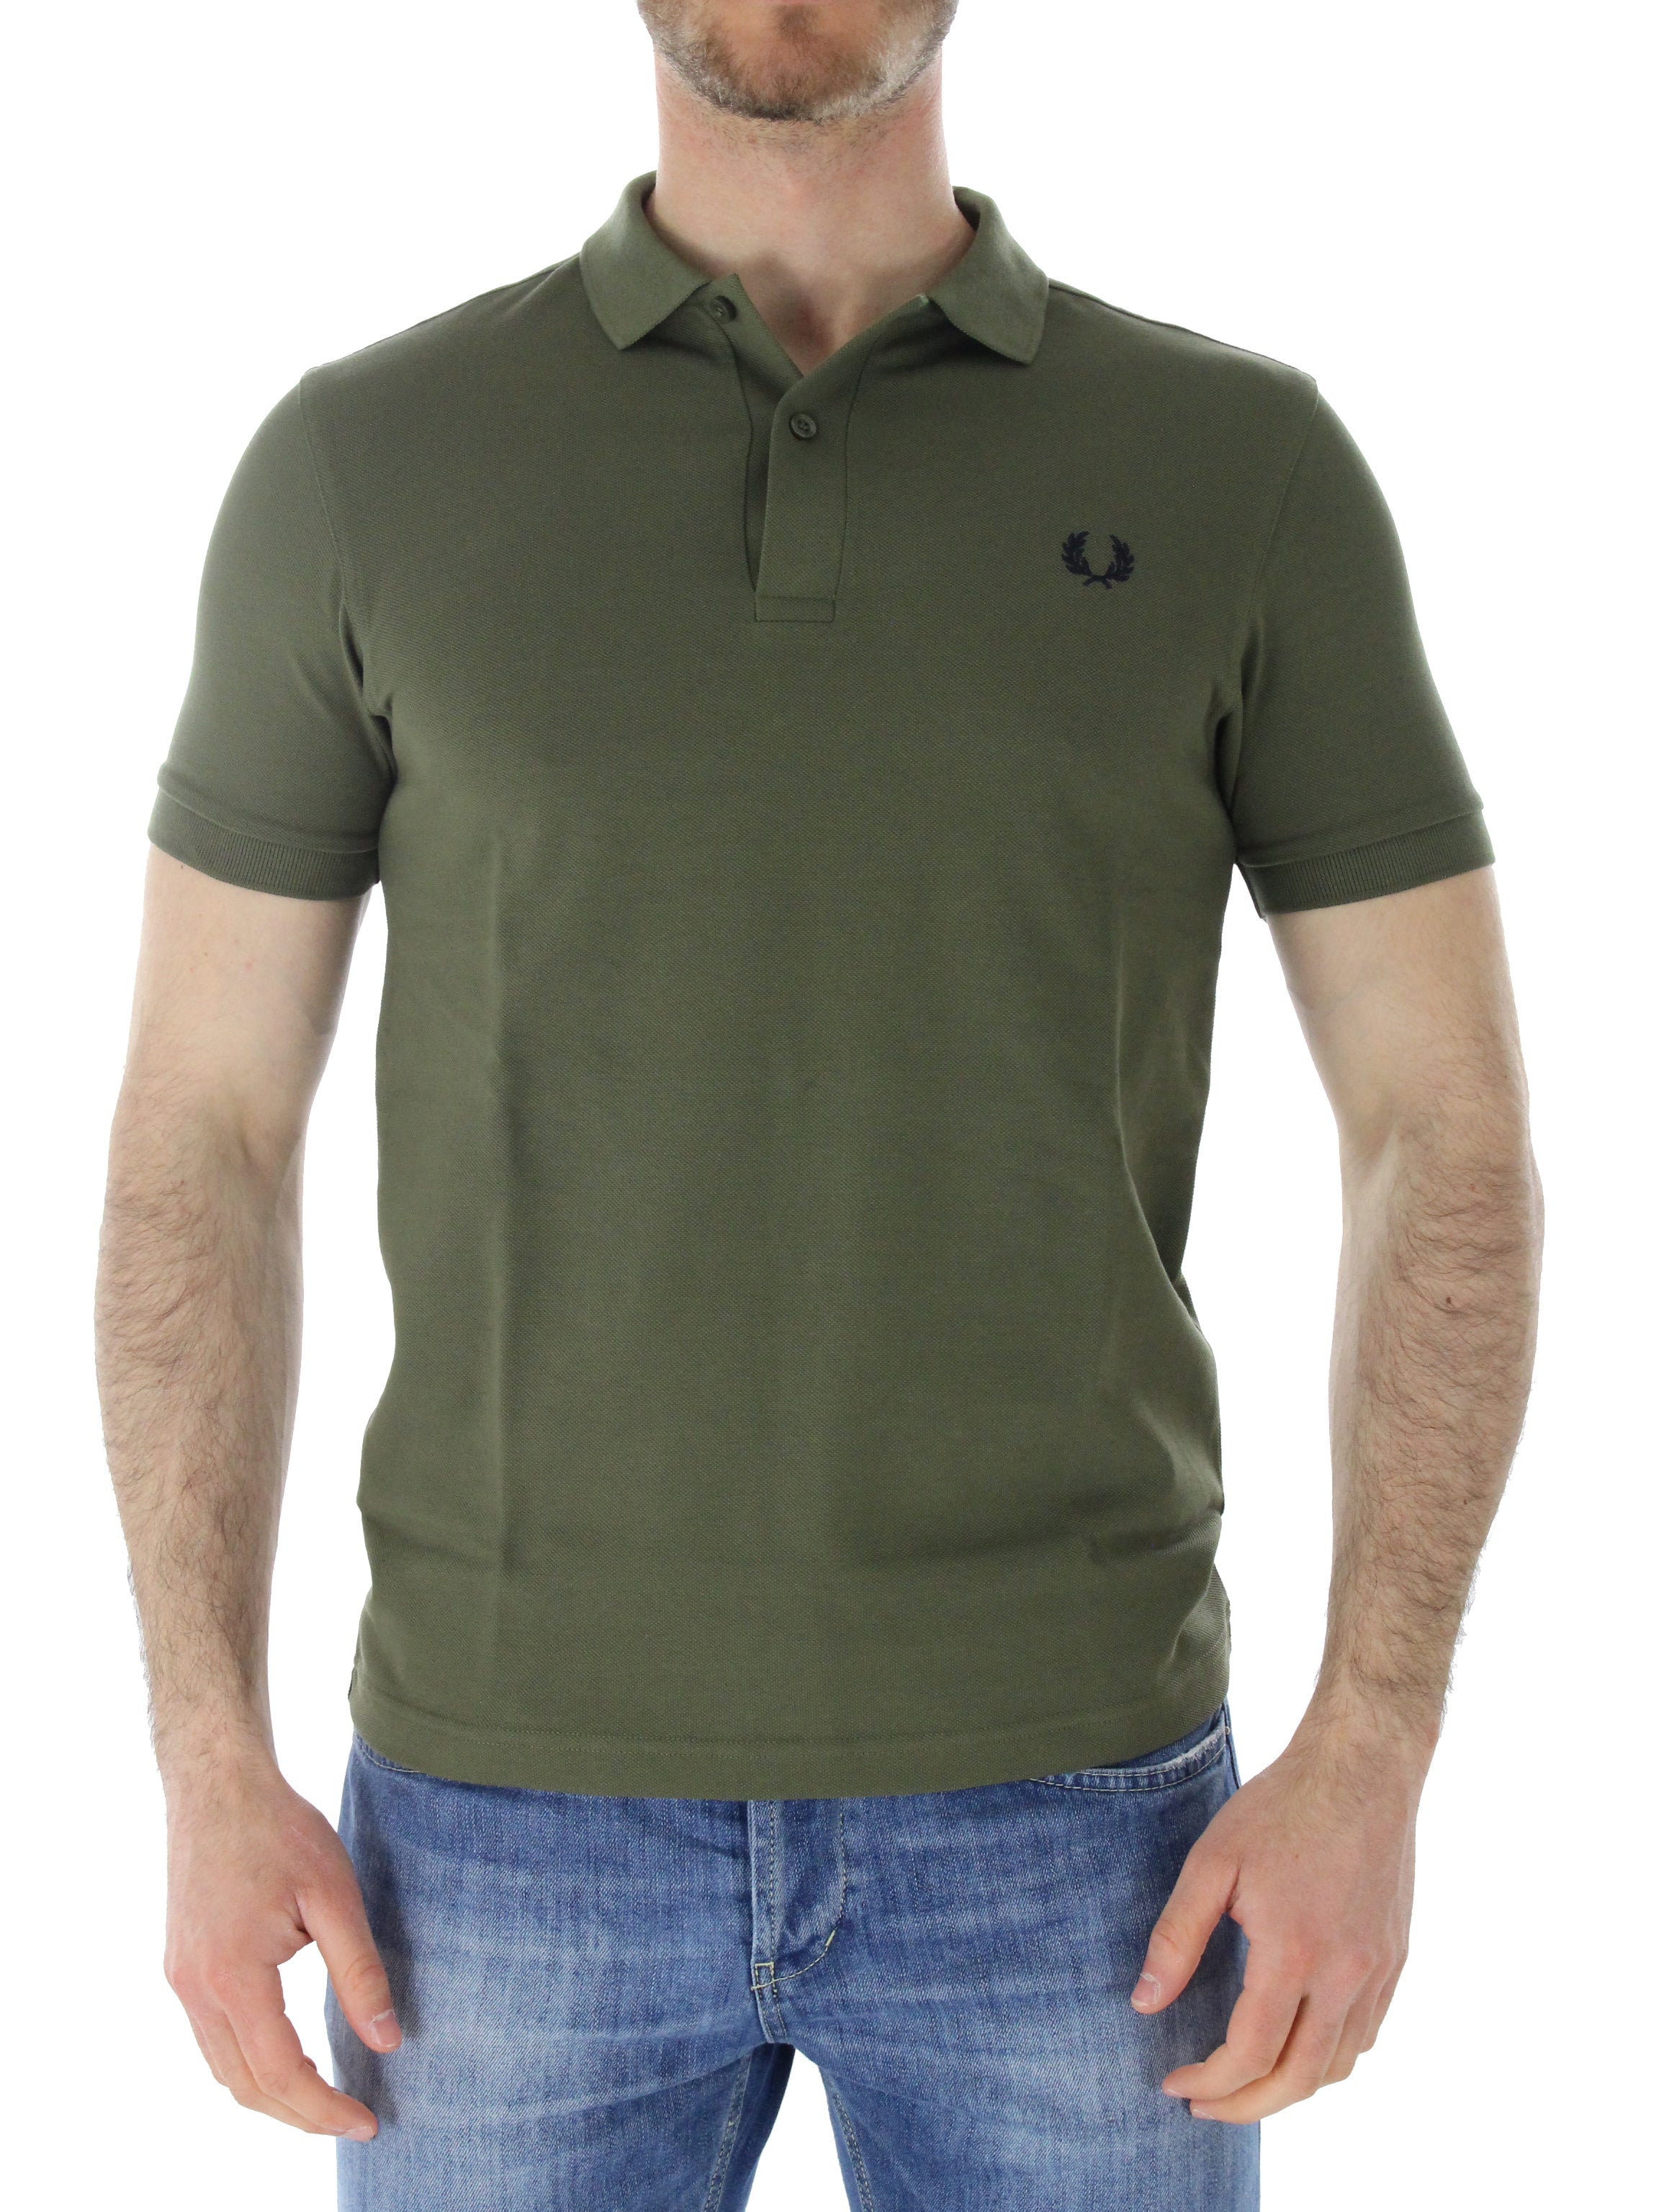 Fred perry polo m/m